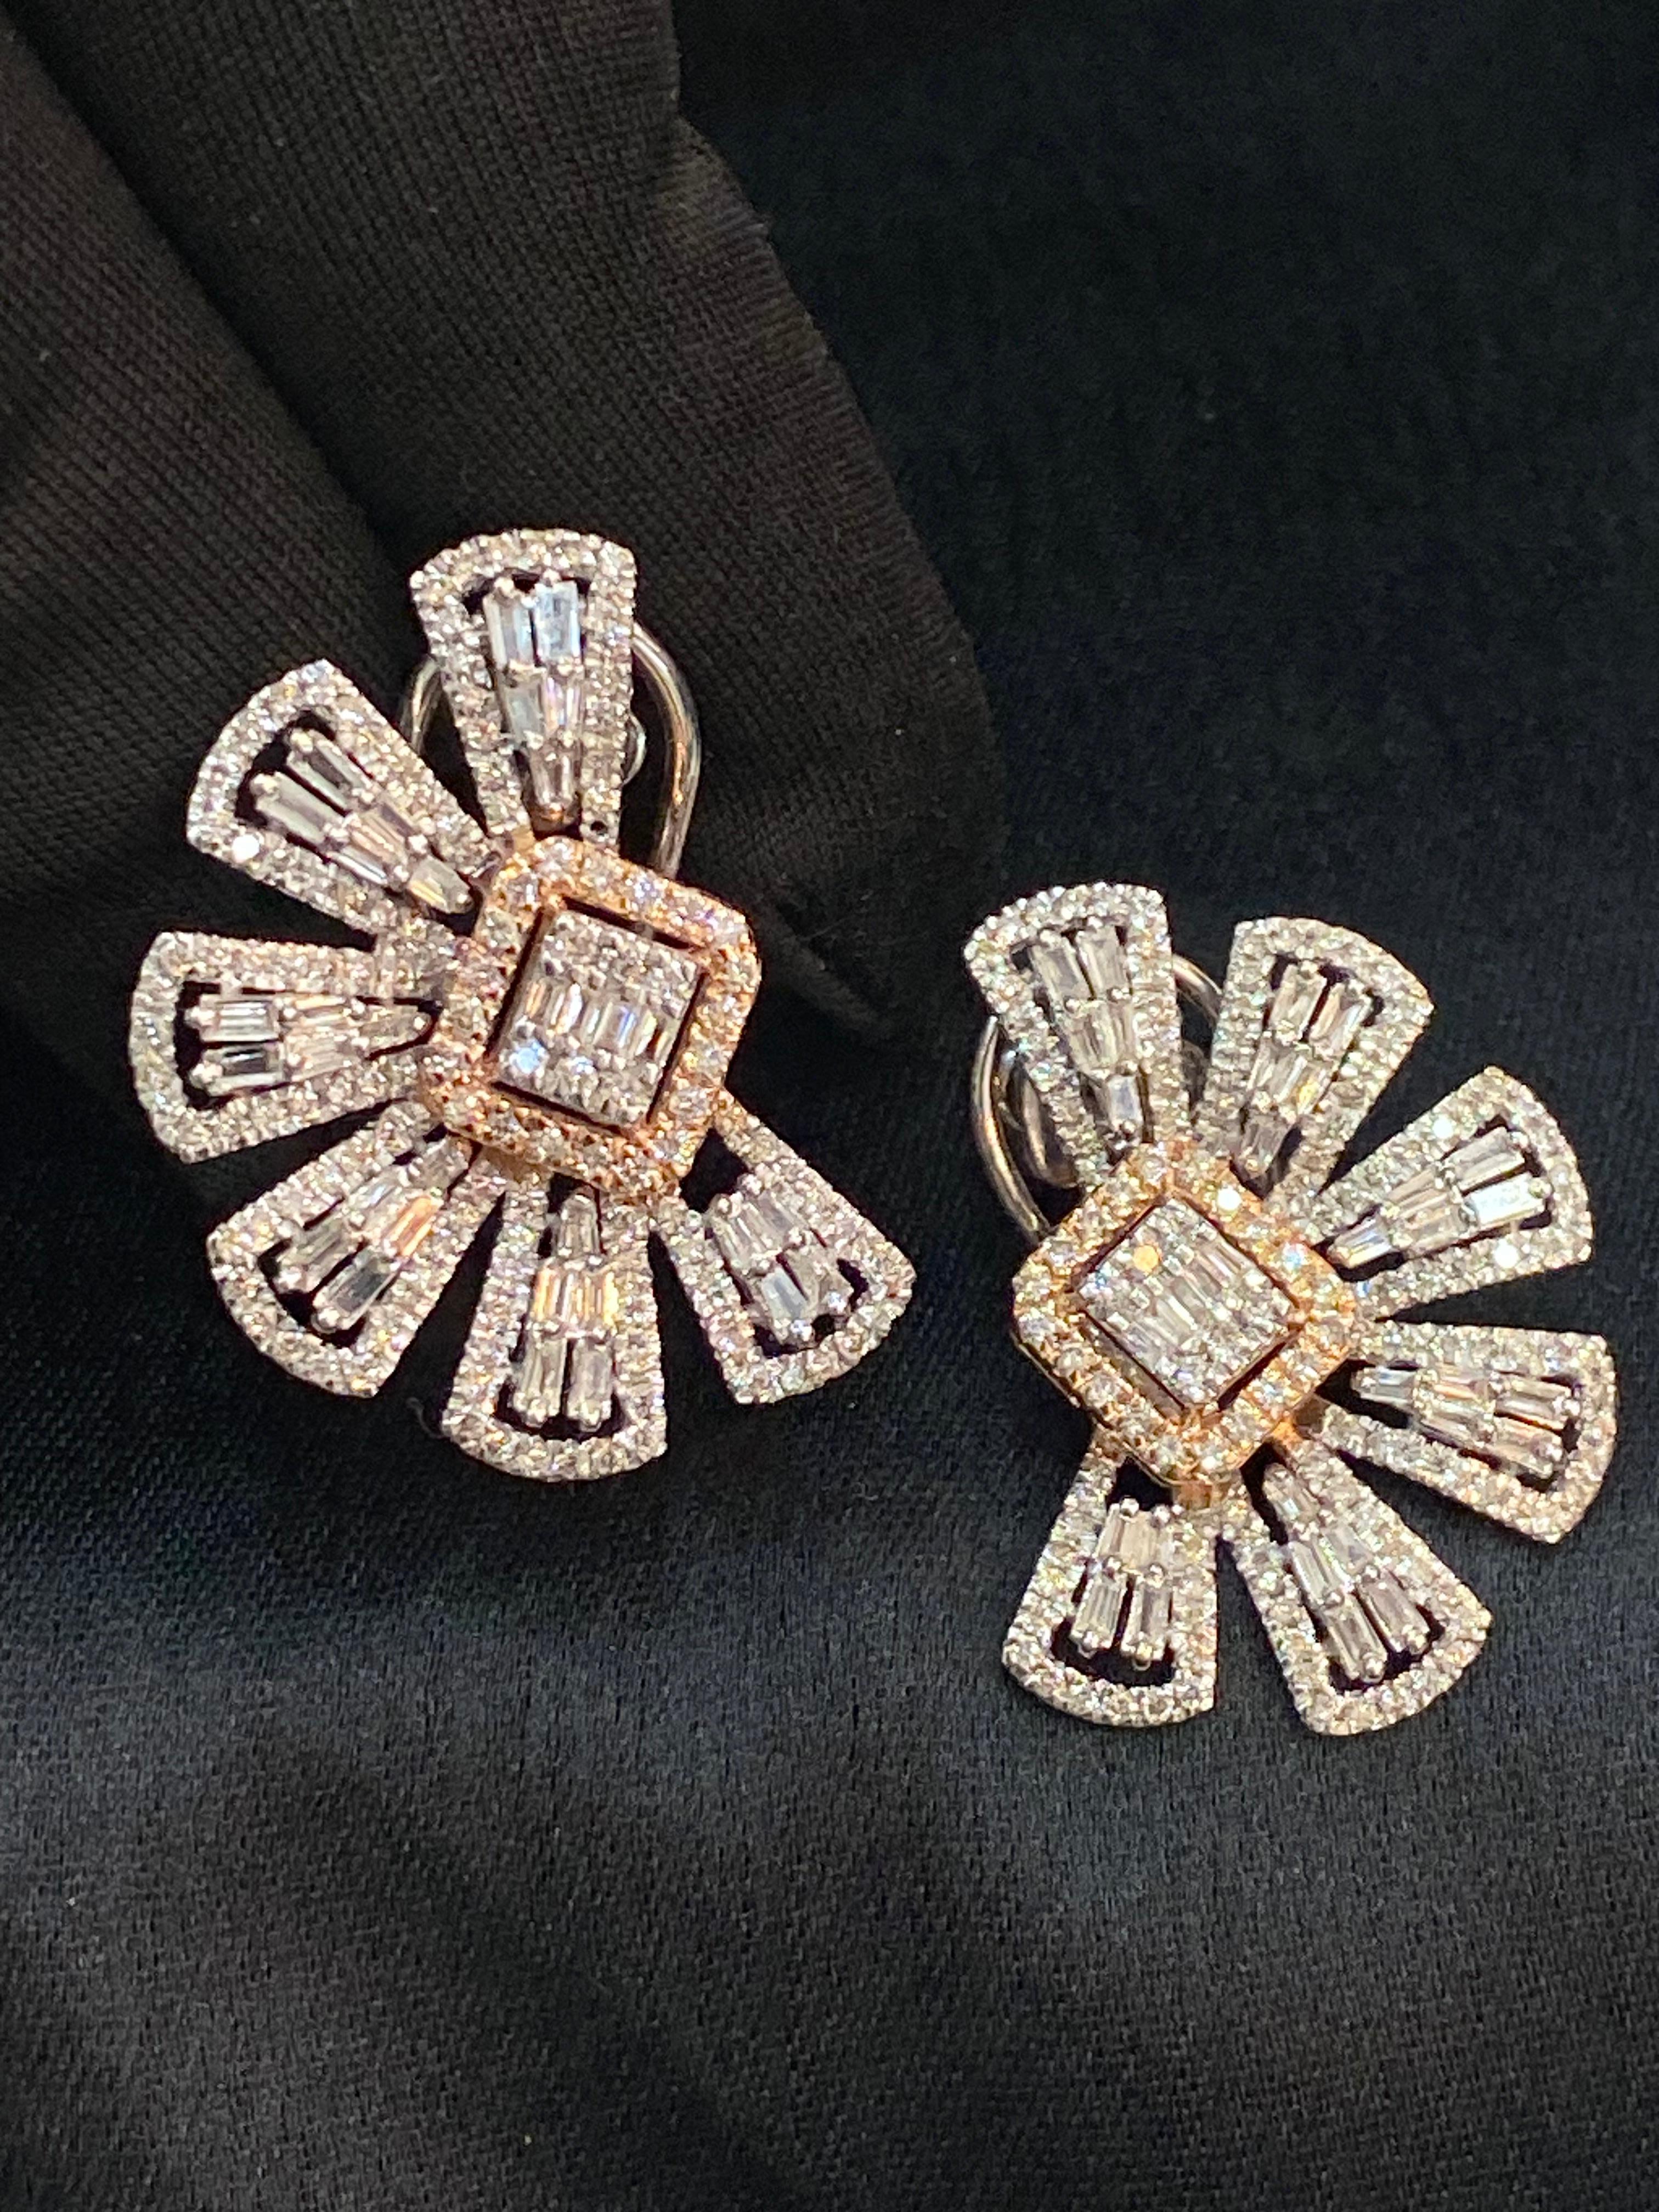 Treat yourself to this magnificent pair of earrings adorned with 2.49 carats of F-VS1 round baguette-shaped diamonds, set in 14 carats of pure gold.!

Specifications : 

Diamond Weight : 2.49 Carats
Diamond Shape : Round & Baguette
Diamond Color